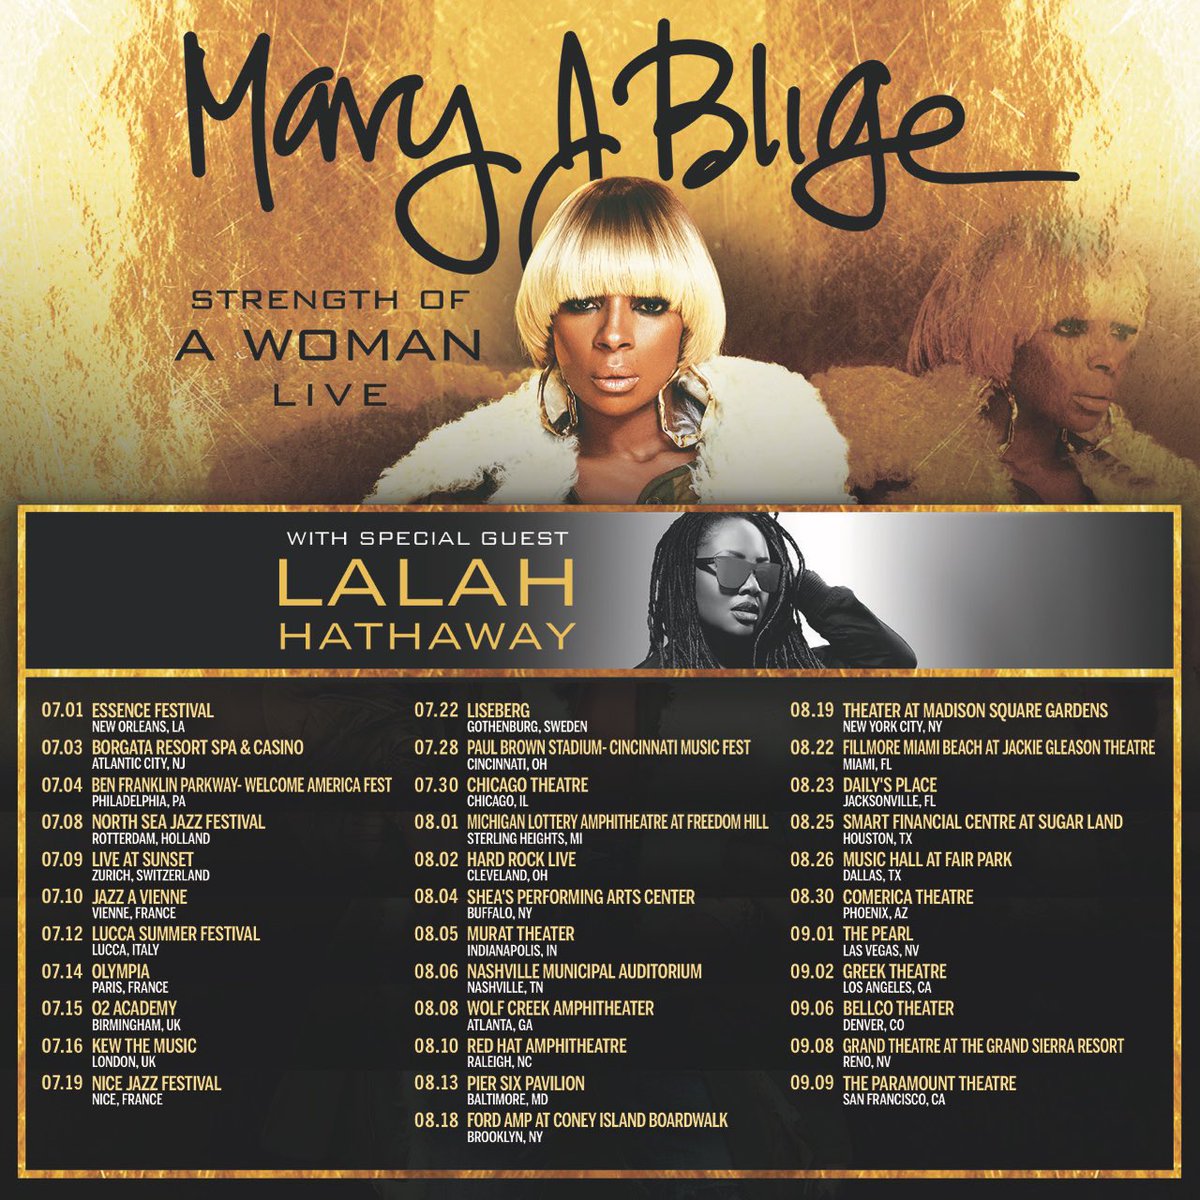 Mary J. Blige Announces “Strength of a Woman” Tour with Lalah Hathaway